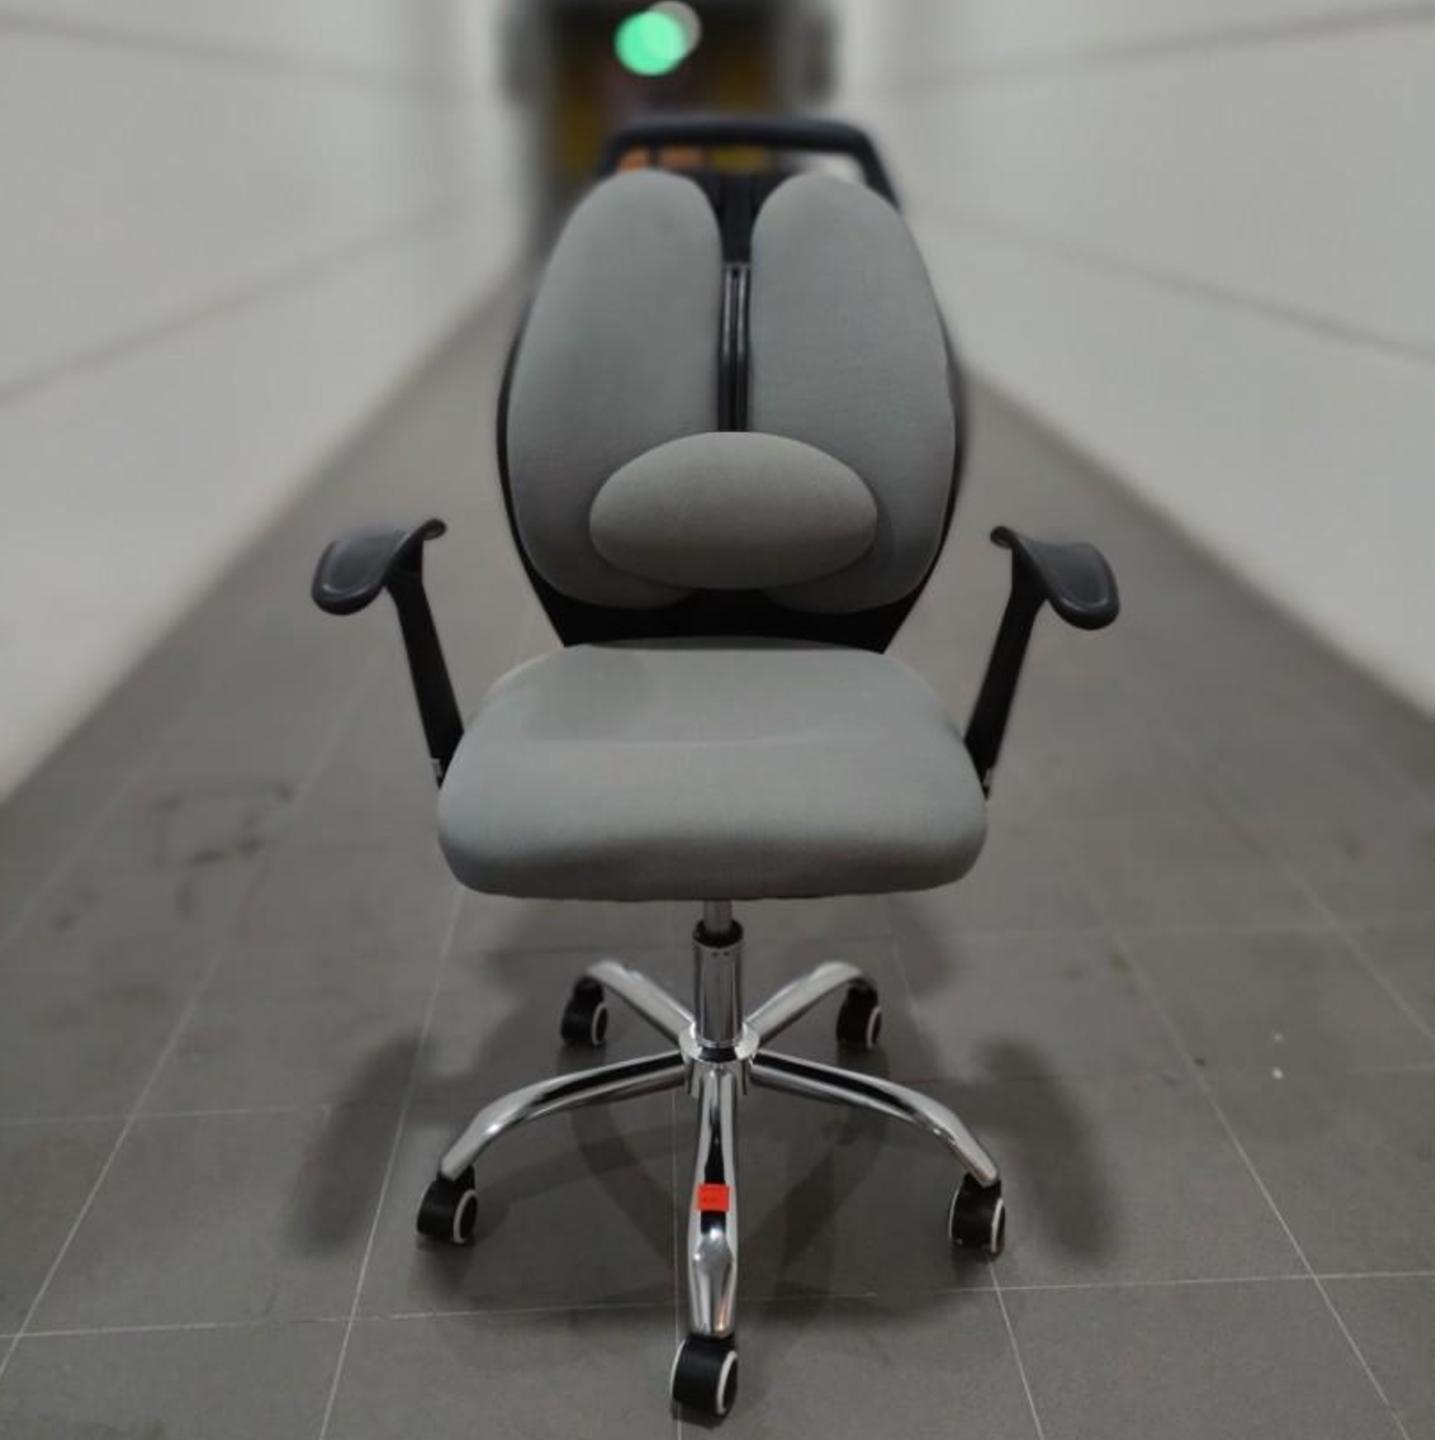 SPAWN IJ DYNASPINE Office Chair in GREY